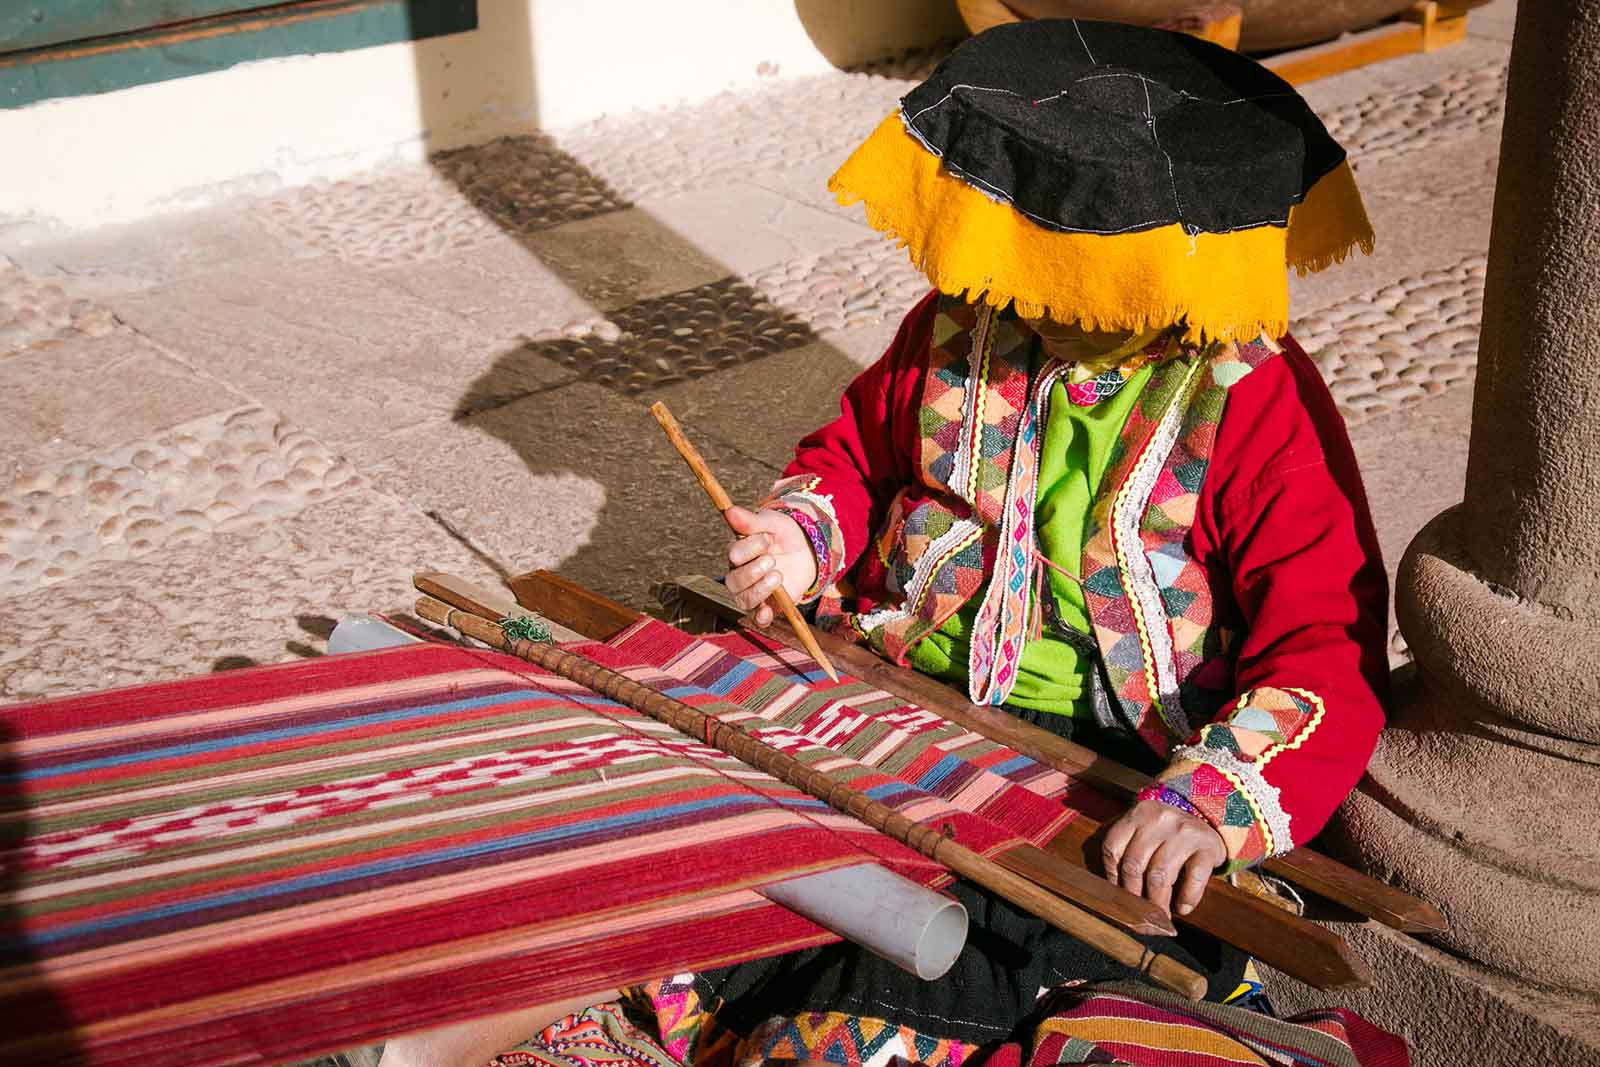 Seek out local artisans like this Quechua woman weaving with lama wool in a traditional way in Cusco, Per